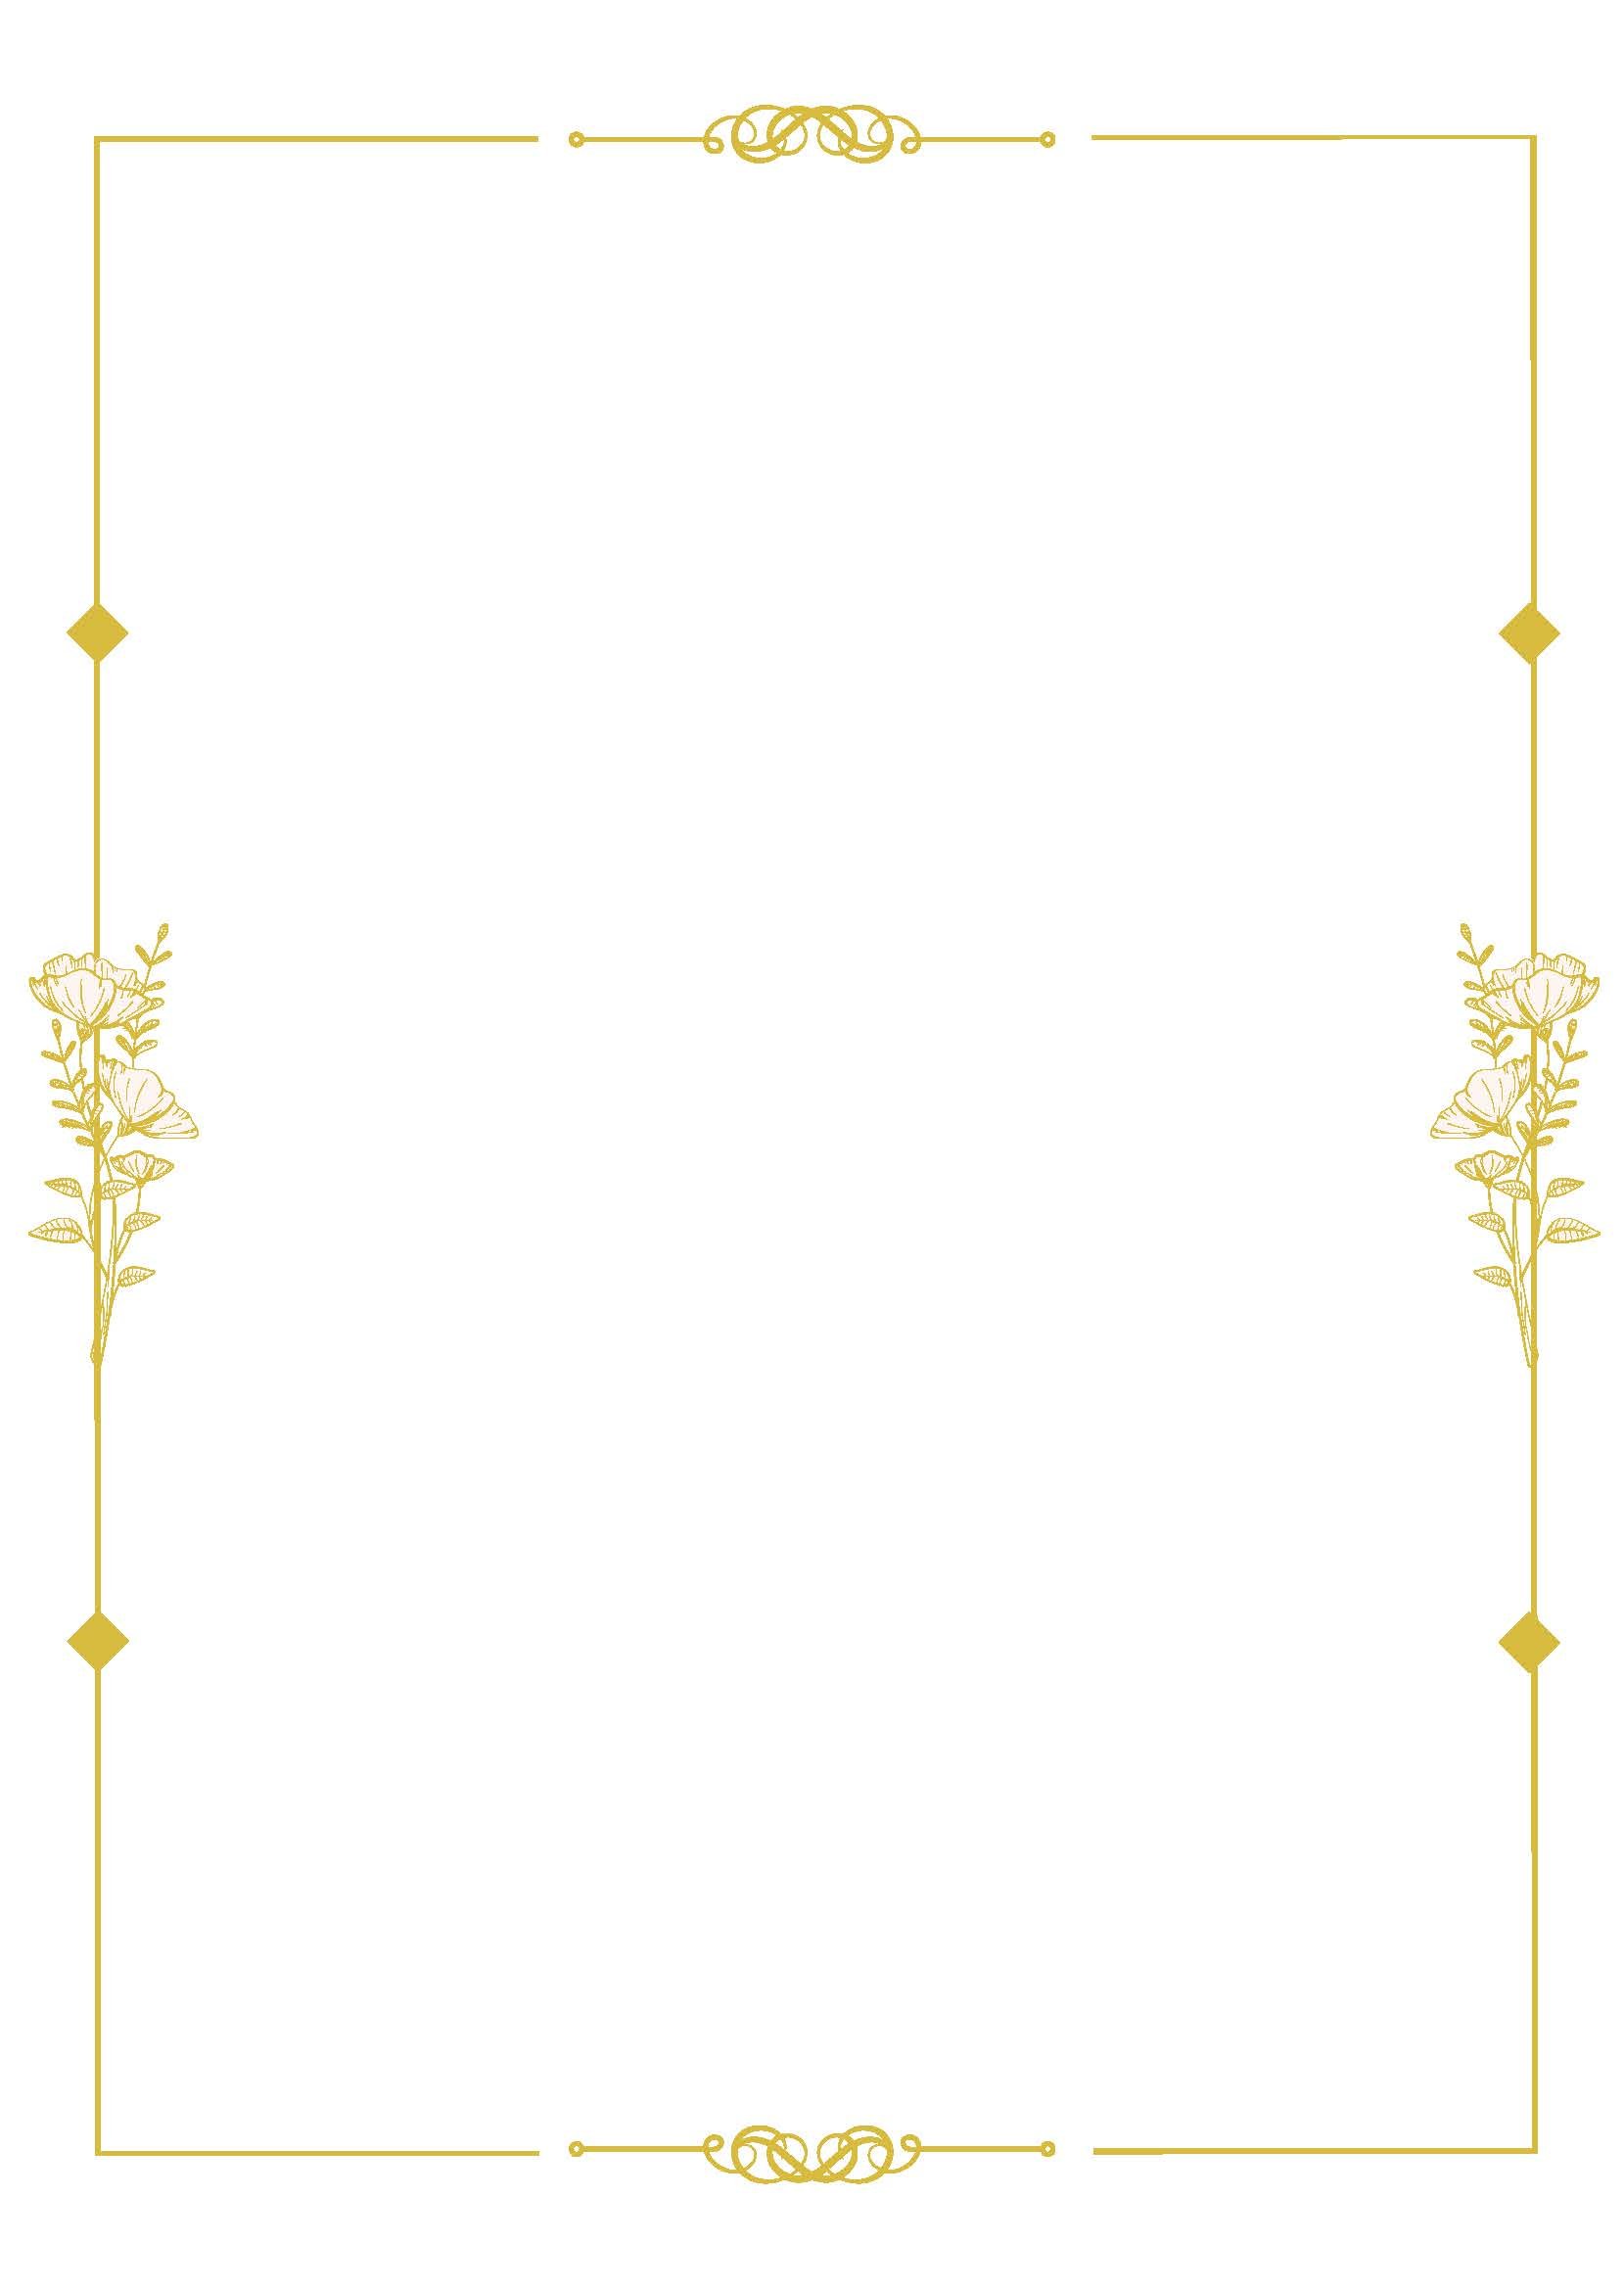 FREE Decorative Border Template Download in Word Google Docs PDF